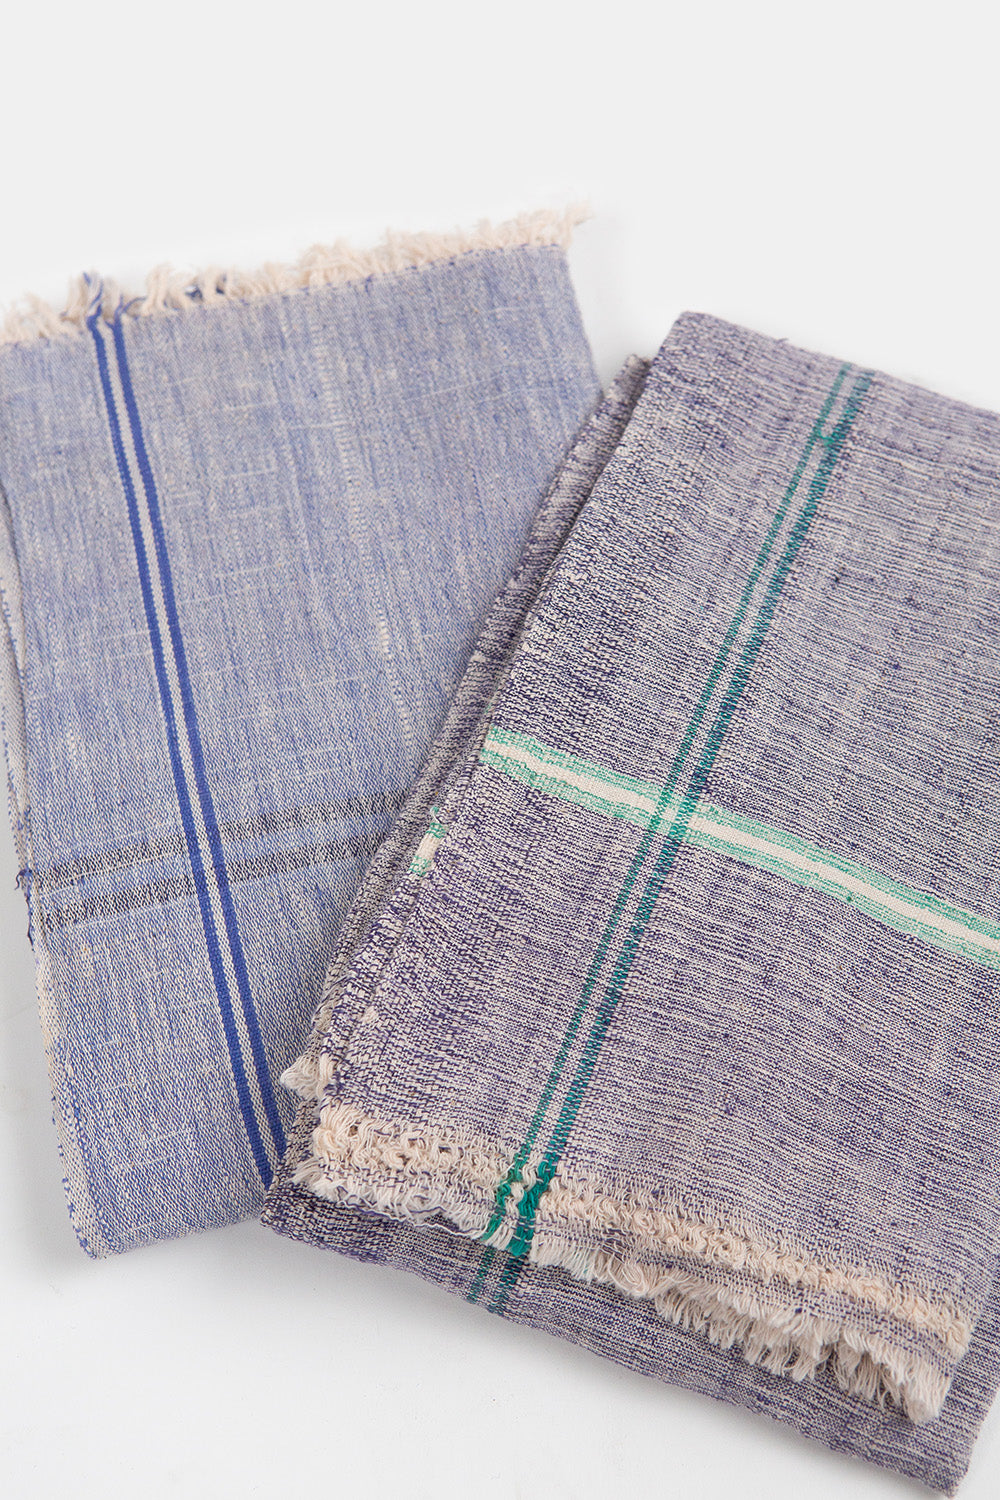 Khadi Cotton Towel in French Blue